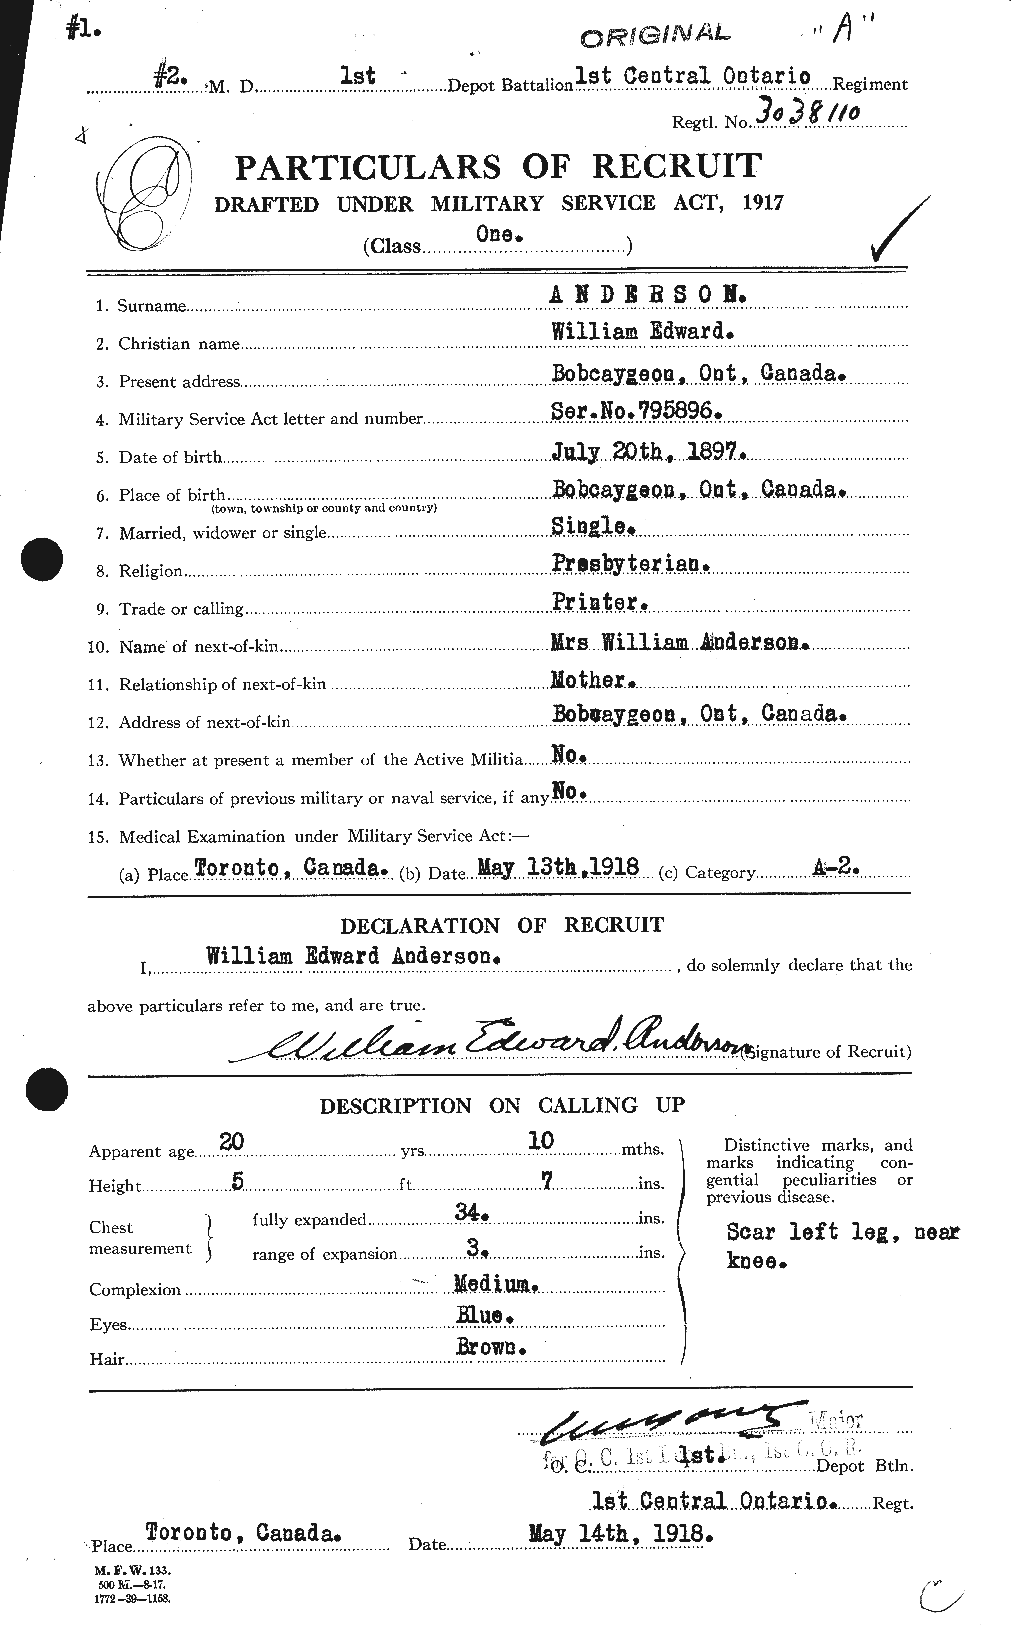 Personnel Records of the First World War - CEF 210789a